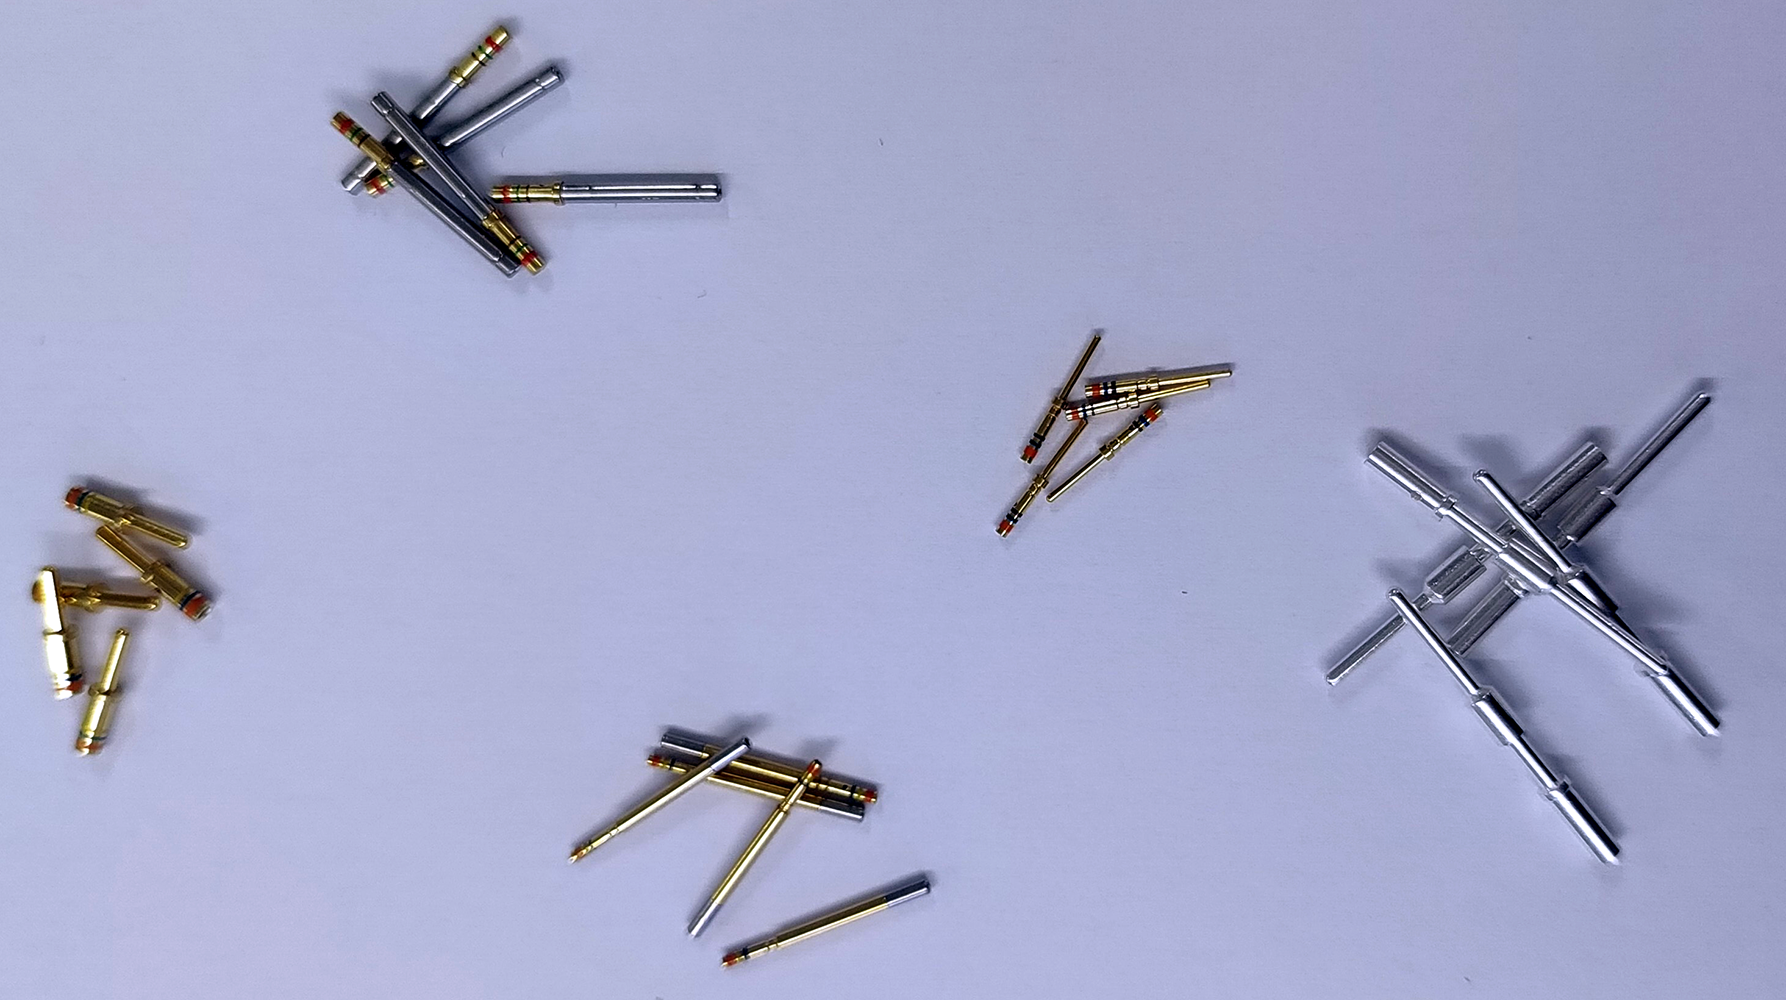 This picture shows examples of different electrical contact pins that we can count with our elmor C1 counter.